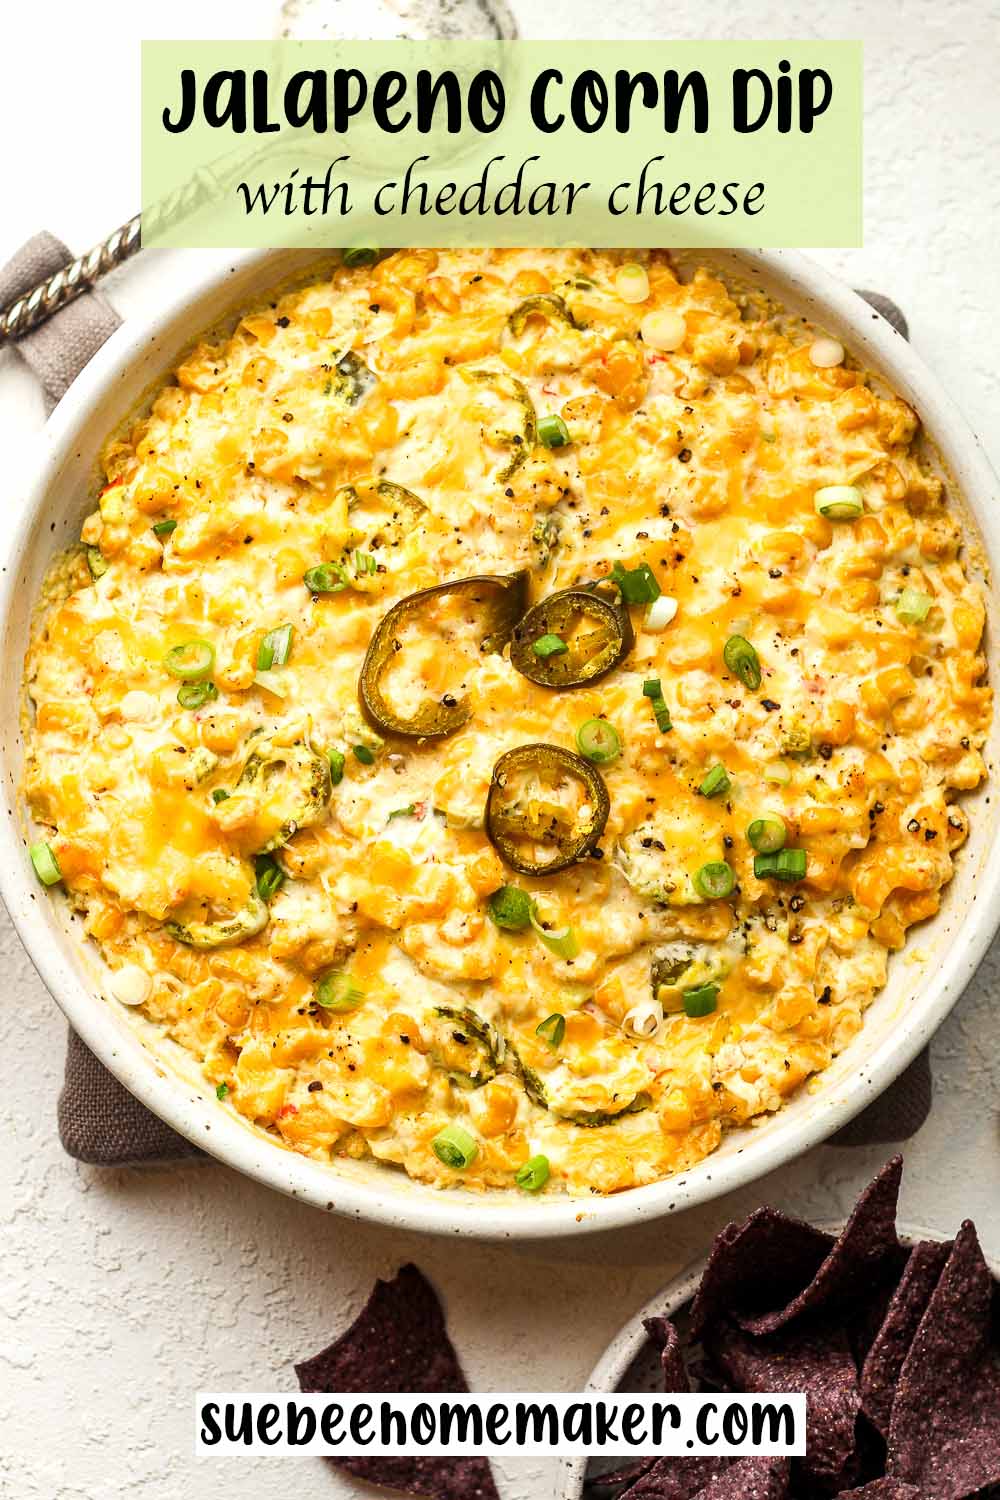 A bowl of jalapeno corn dip with cheddar cheese.